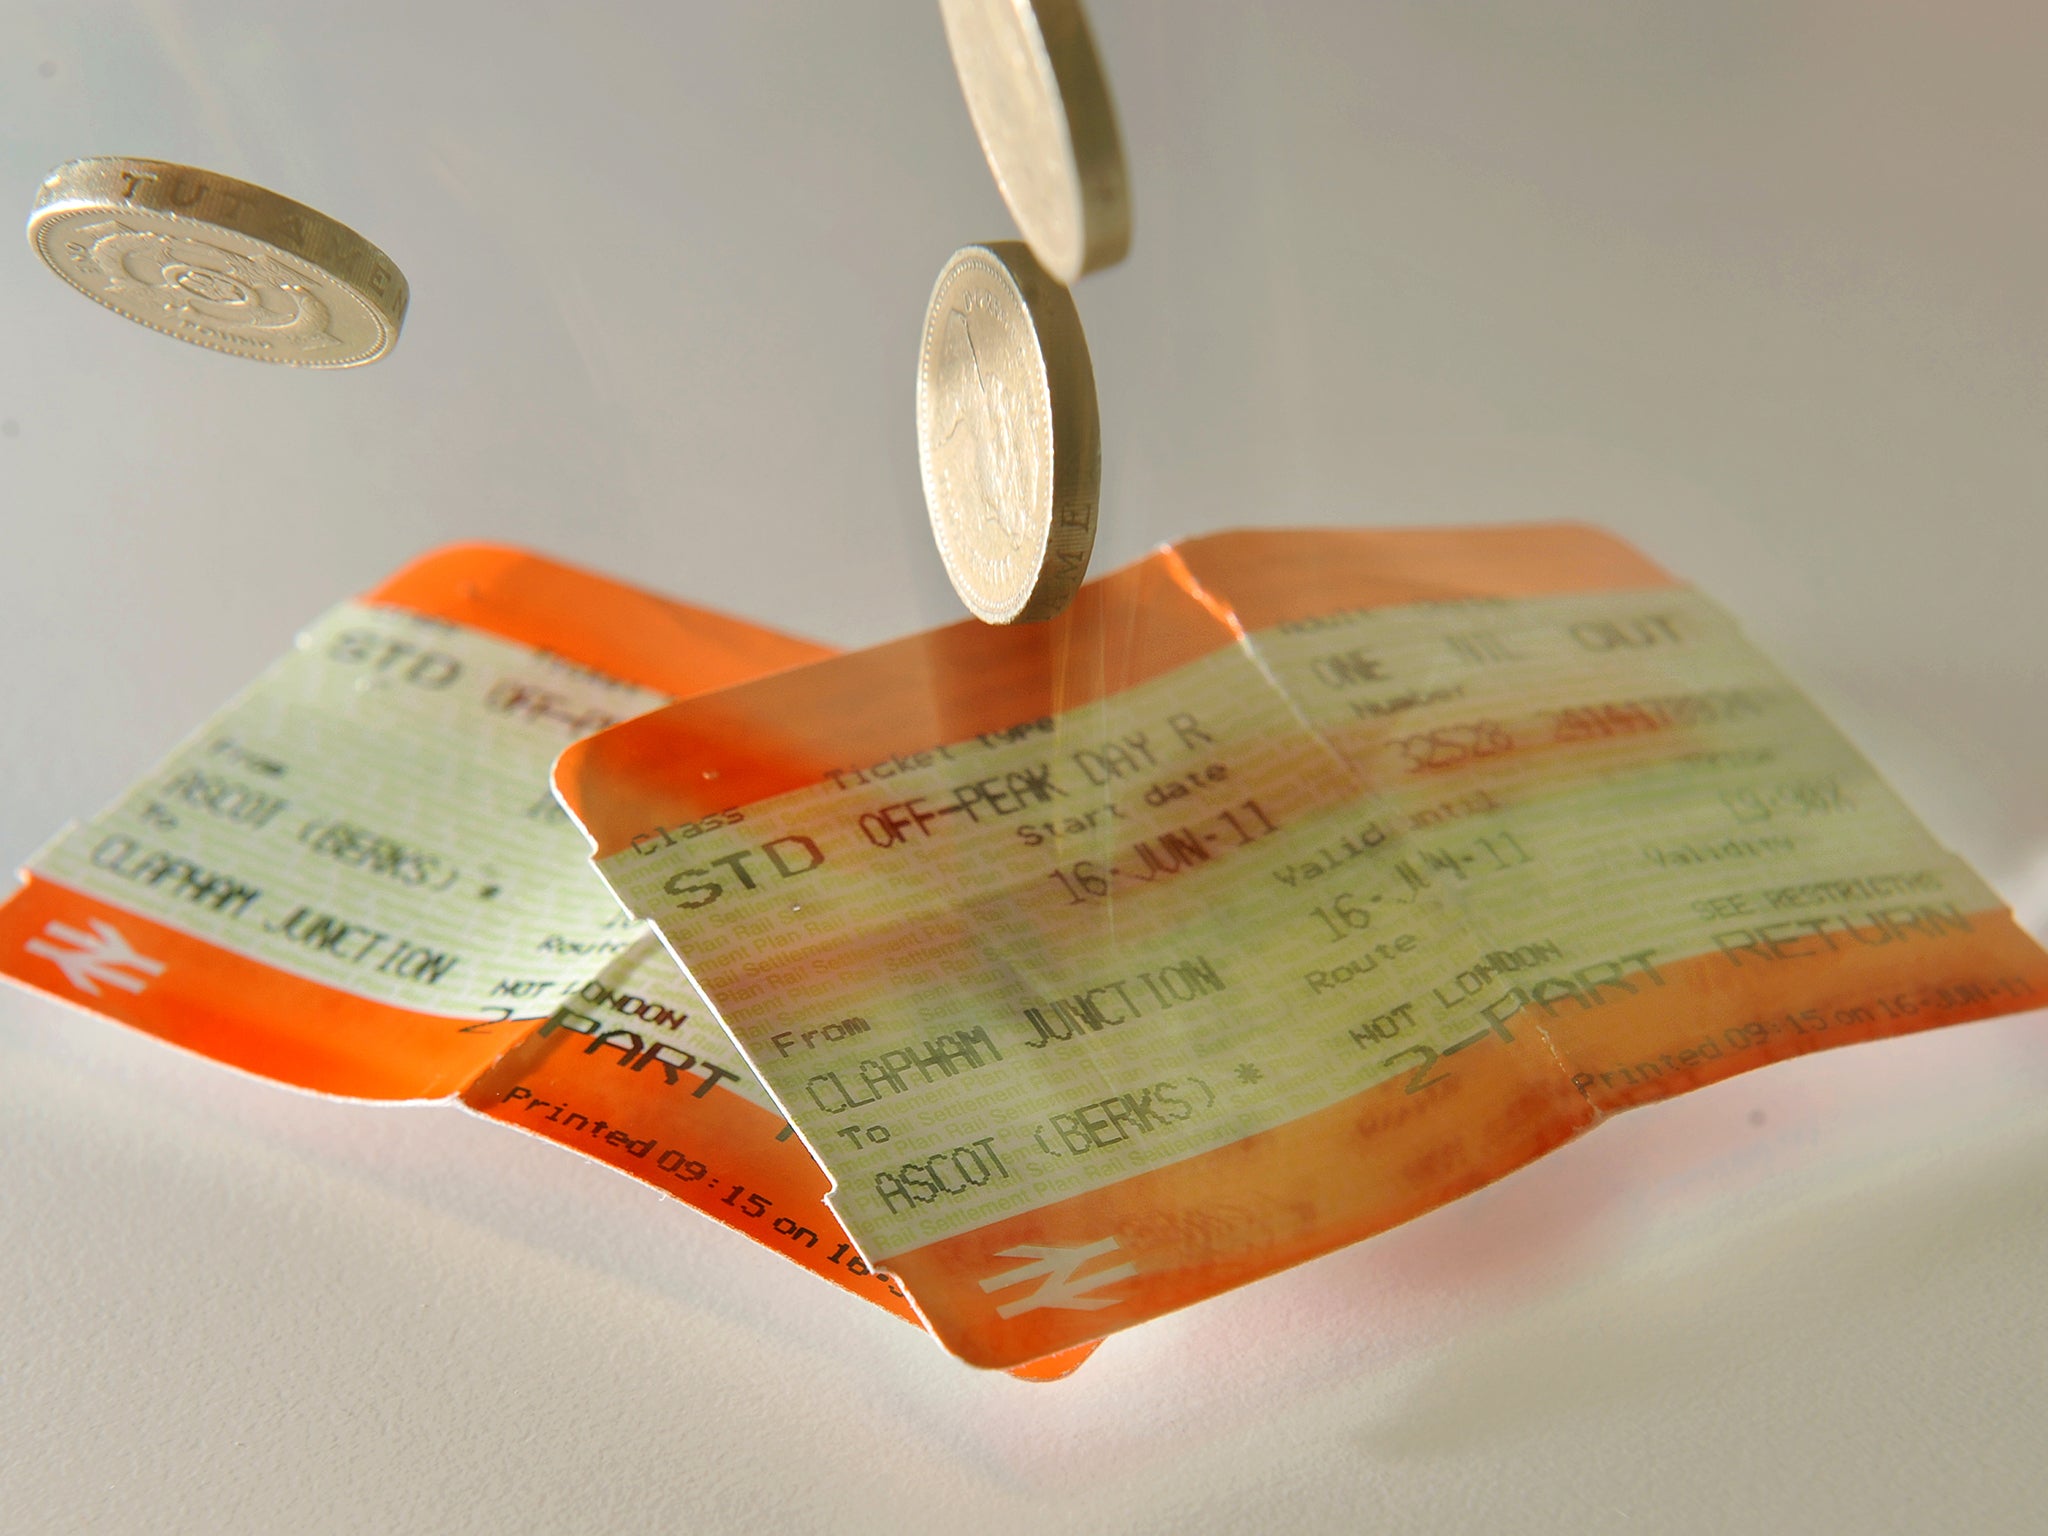 Last year, rail fares for season ticket holders increased by an average of 4.2 per cent